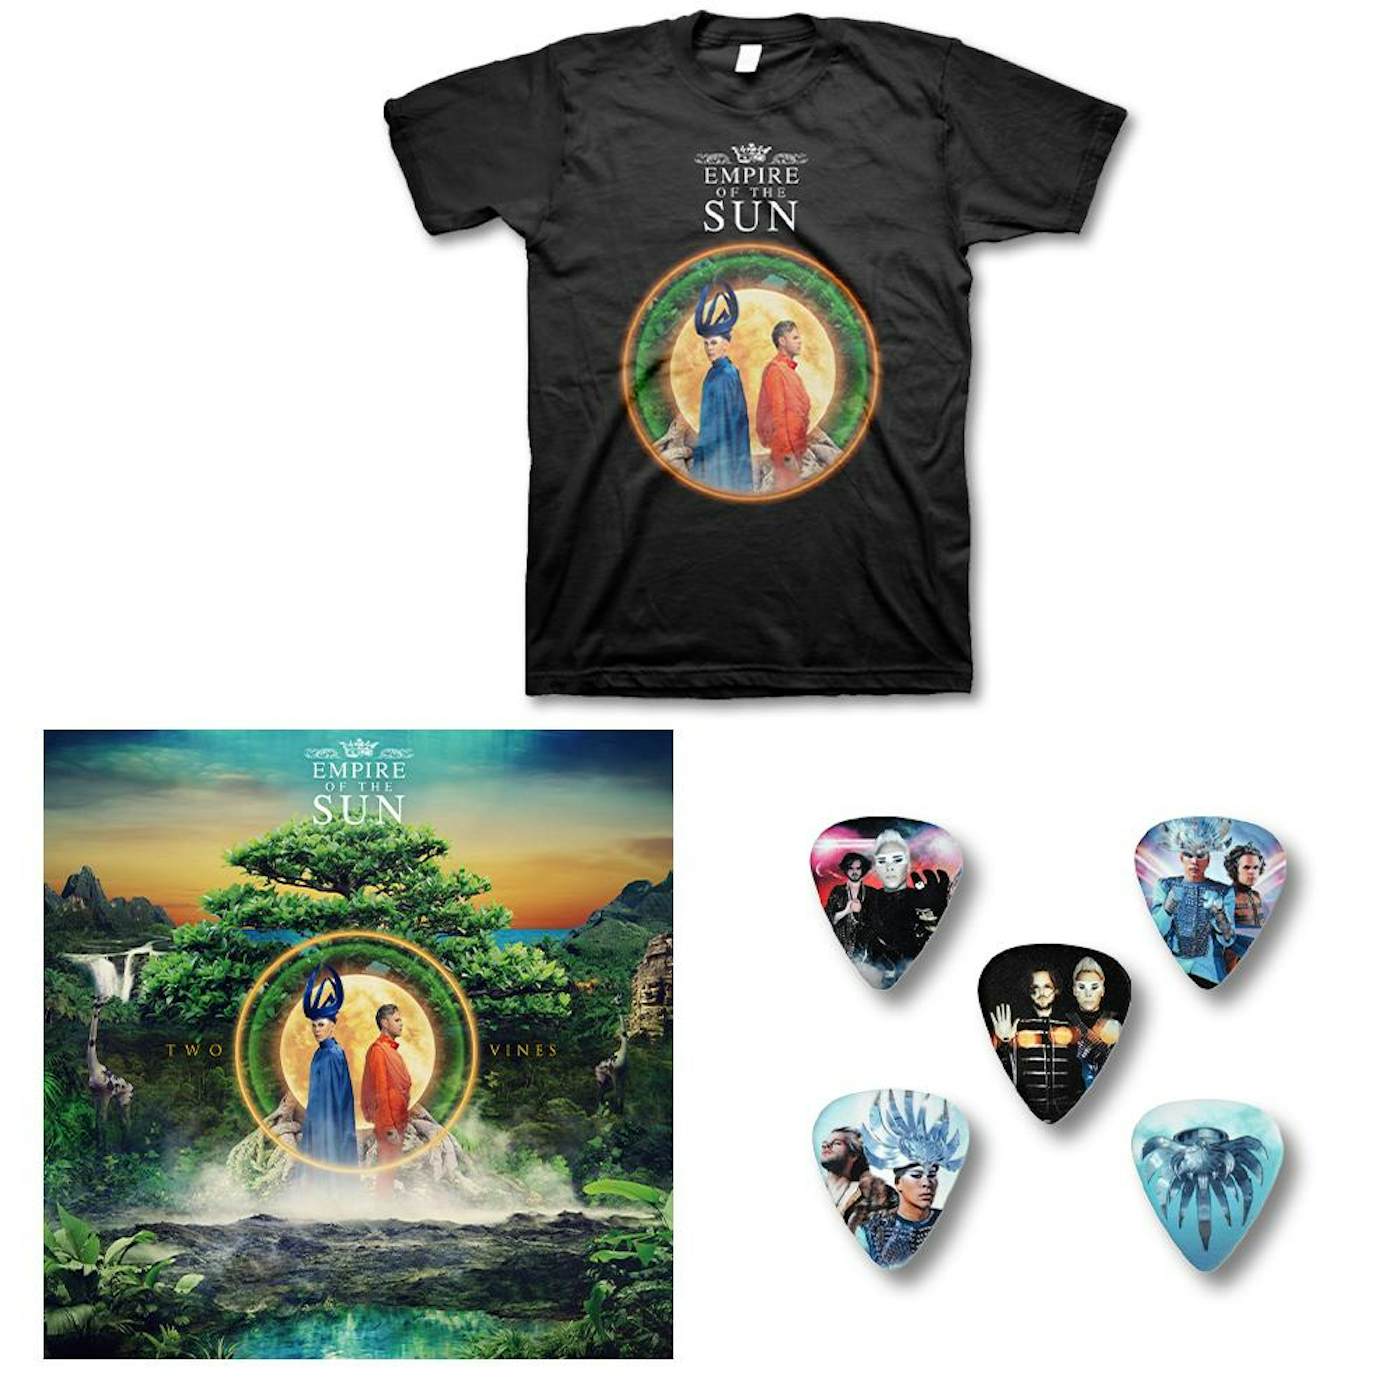 Empire of the Sun Two Vines Bundle